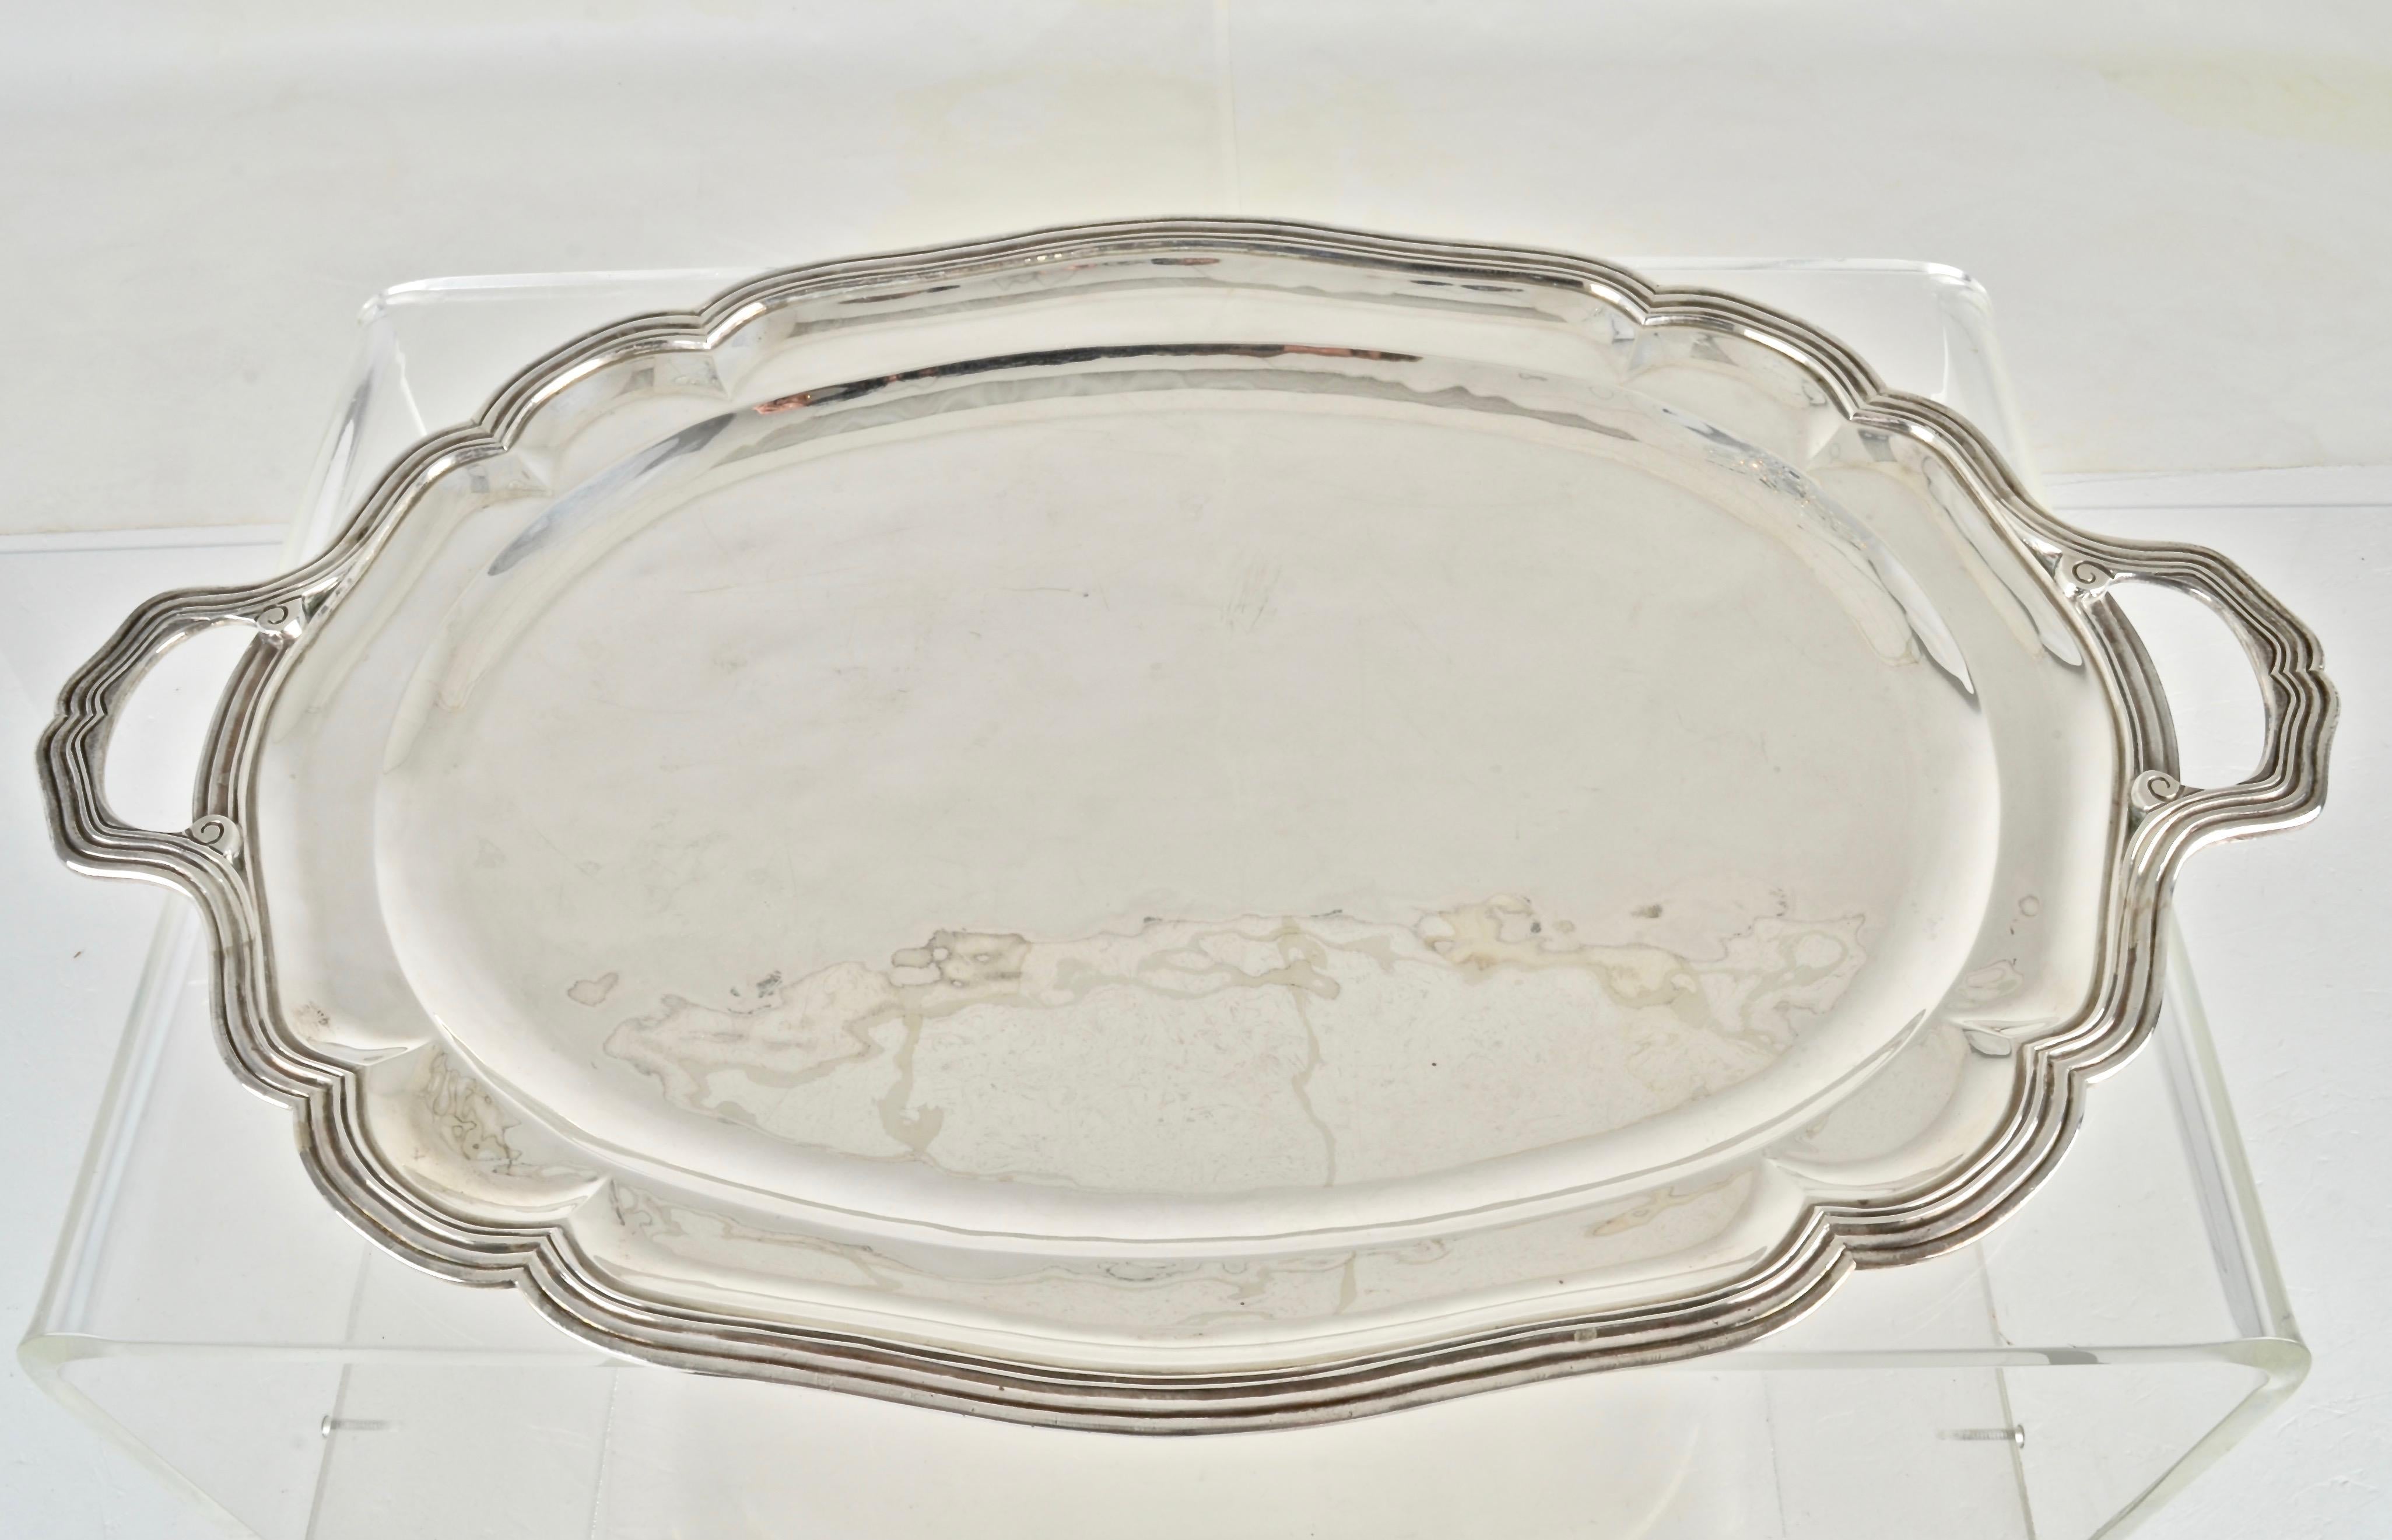 Mexican Sterling Tray by Sanborns 85.3 Troy Ounces 1